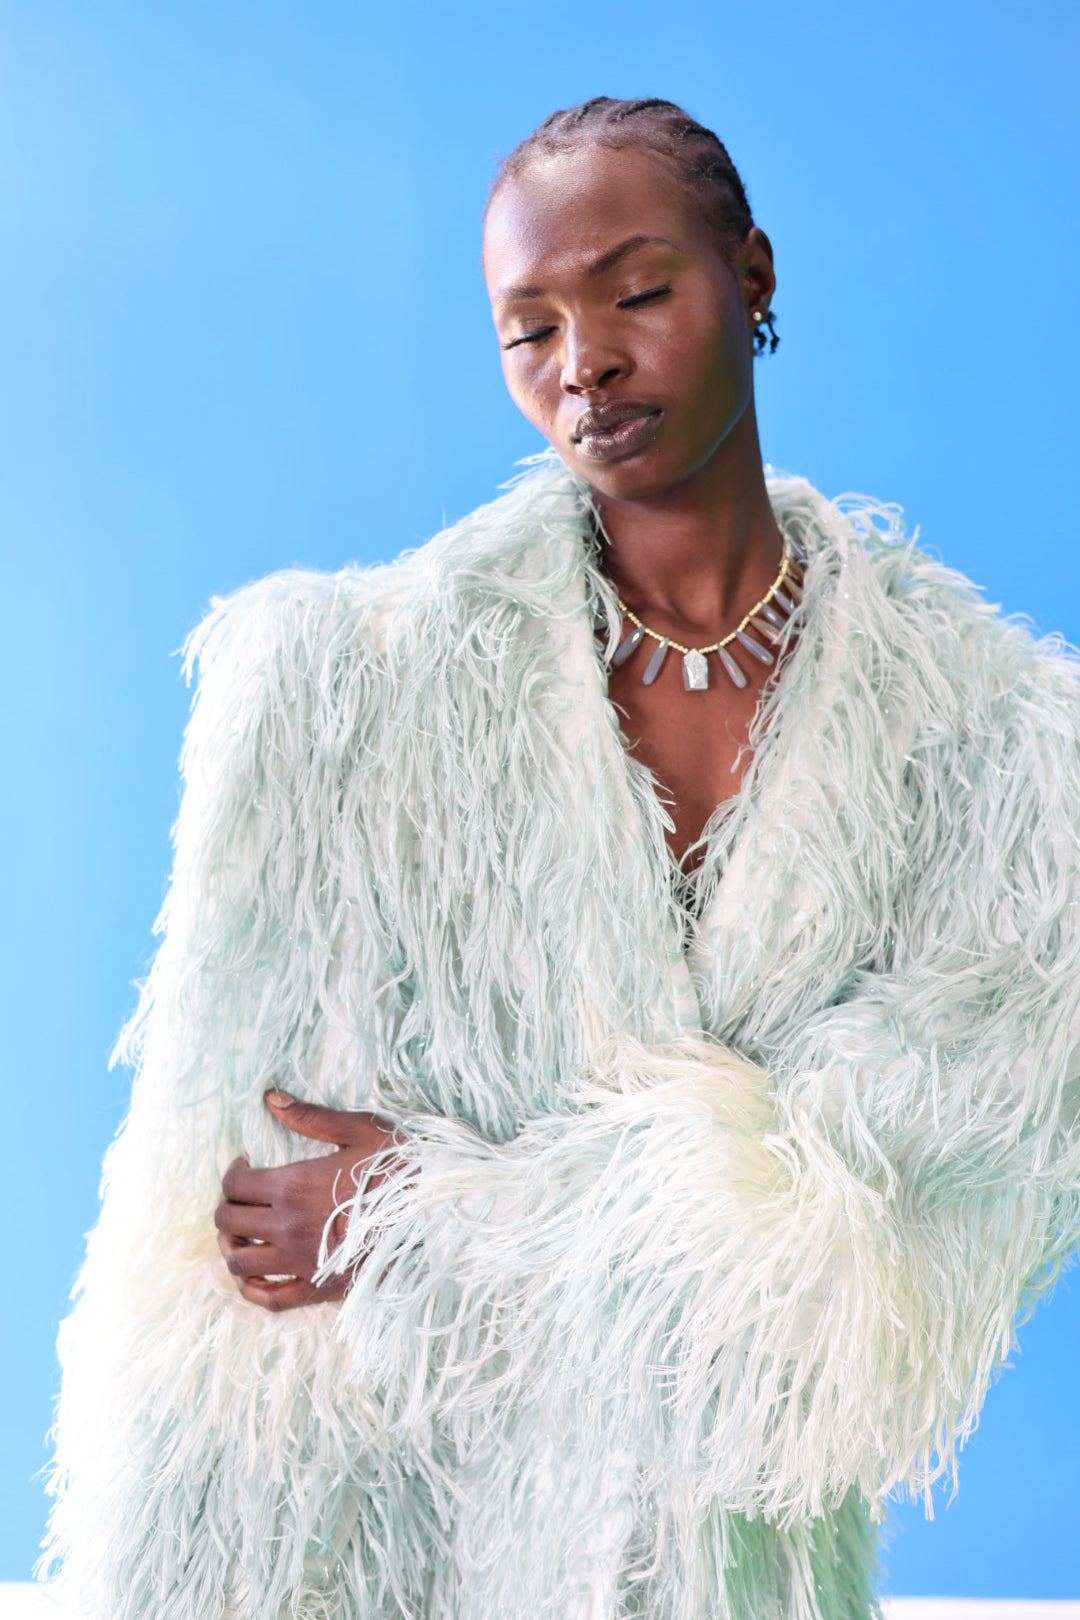 The Enola Shaggy Coat has an ombre effect from light blue to creamy white. The faux fur adds a feeling of luxury to this versatile coat.